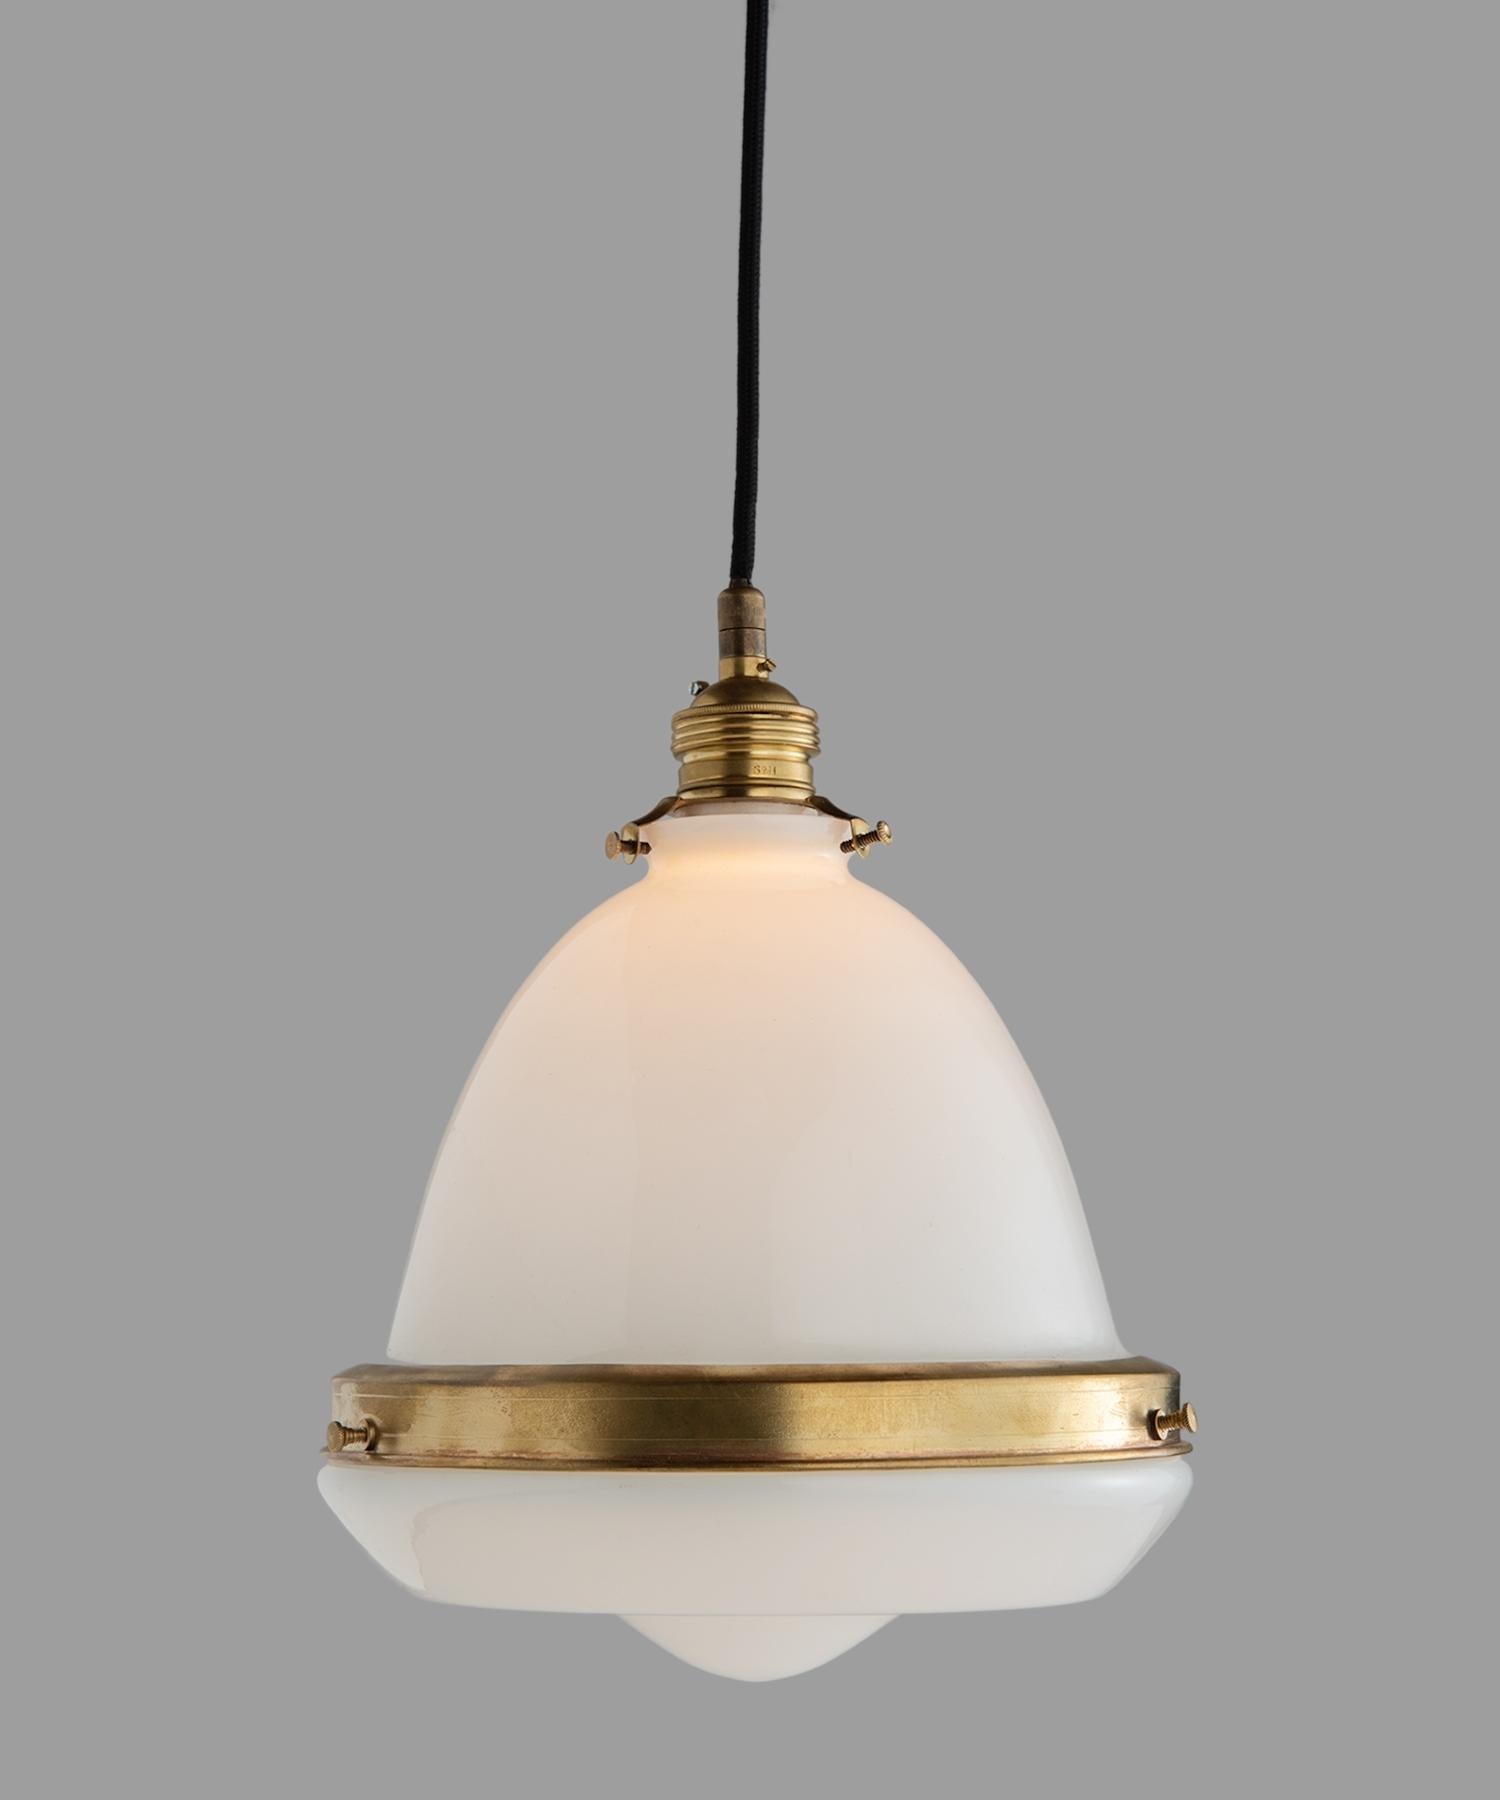 Petite opaline and brass pendant, Italy, 21st century.

Unique form with beautifully patinated brass hardware. Drop is adjustable.

Measures: 8.75